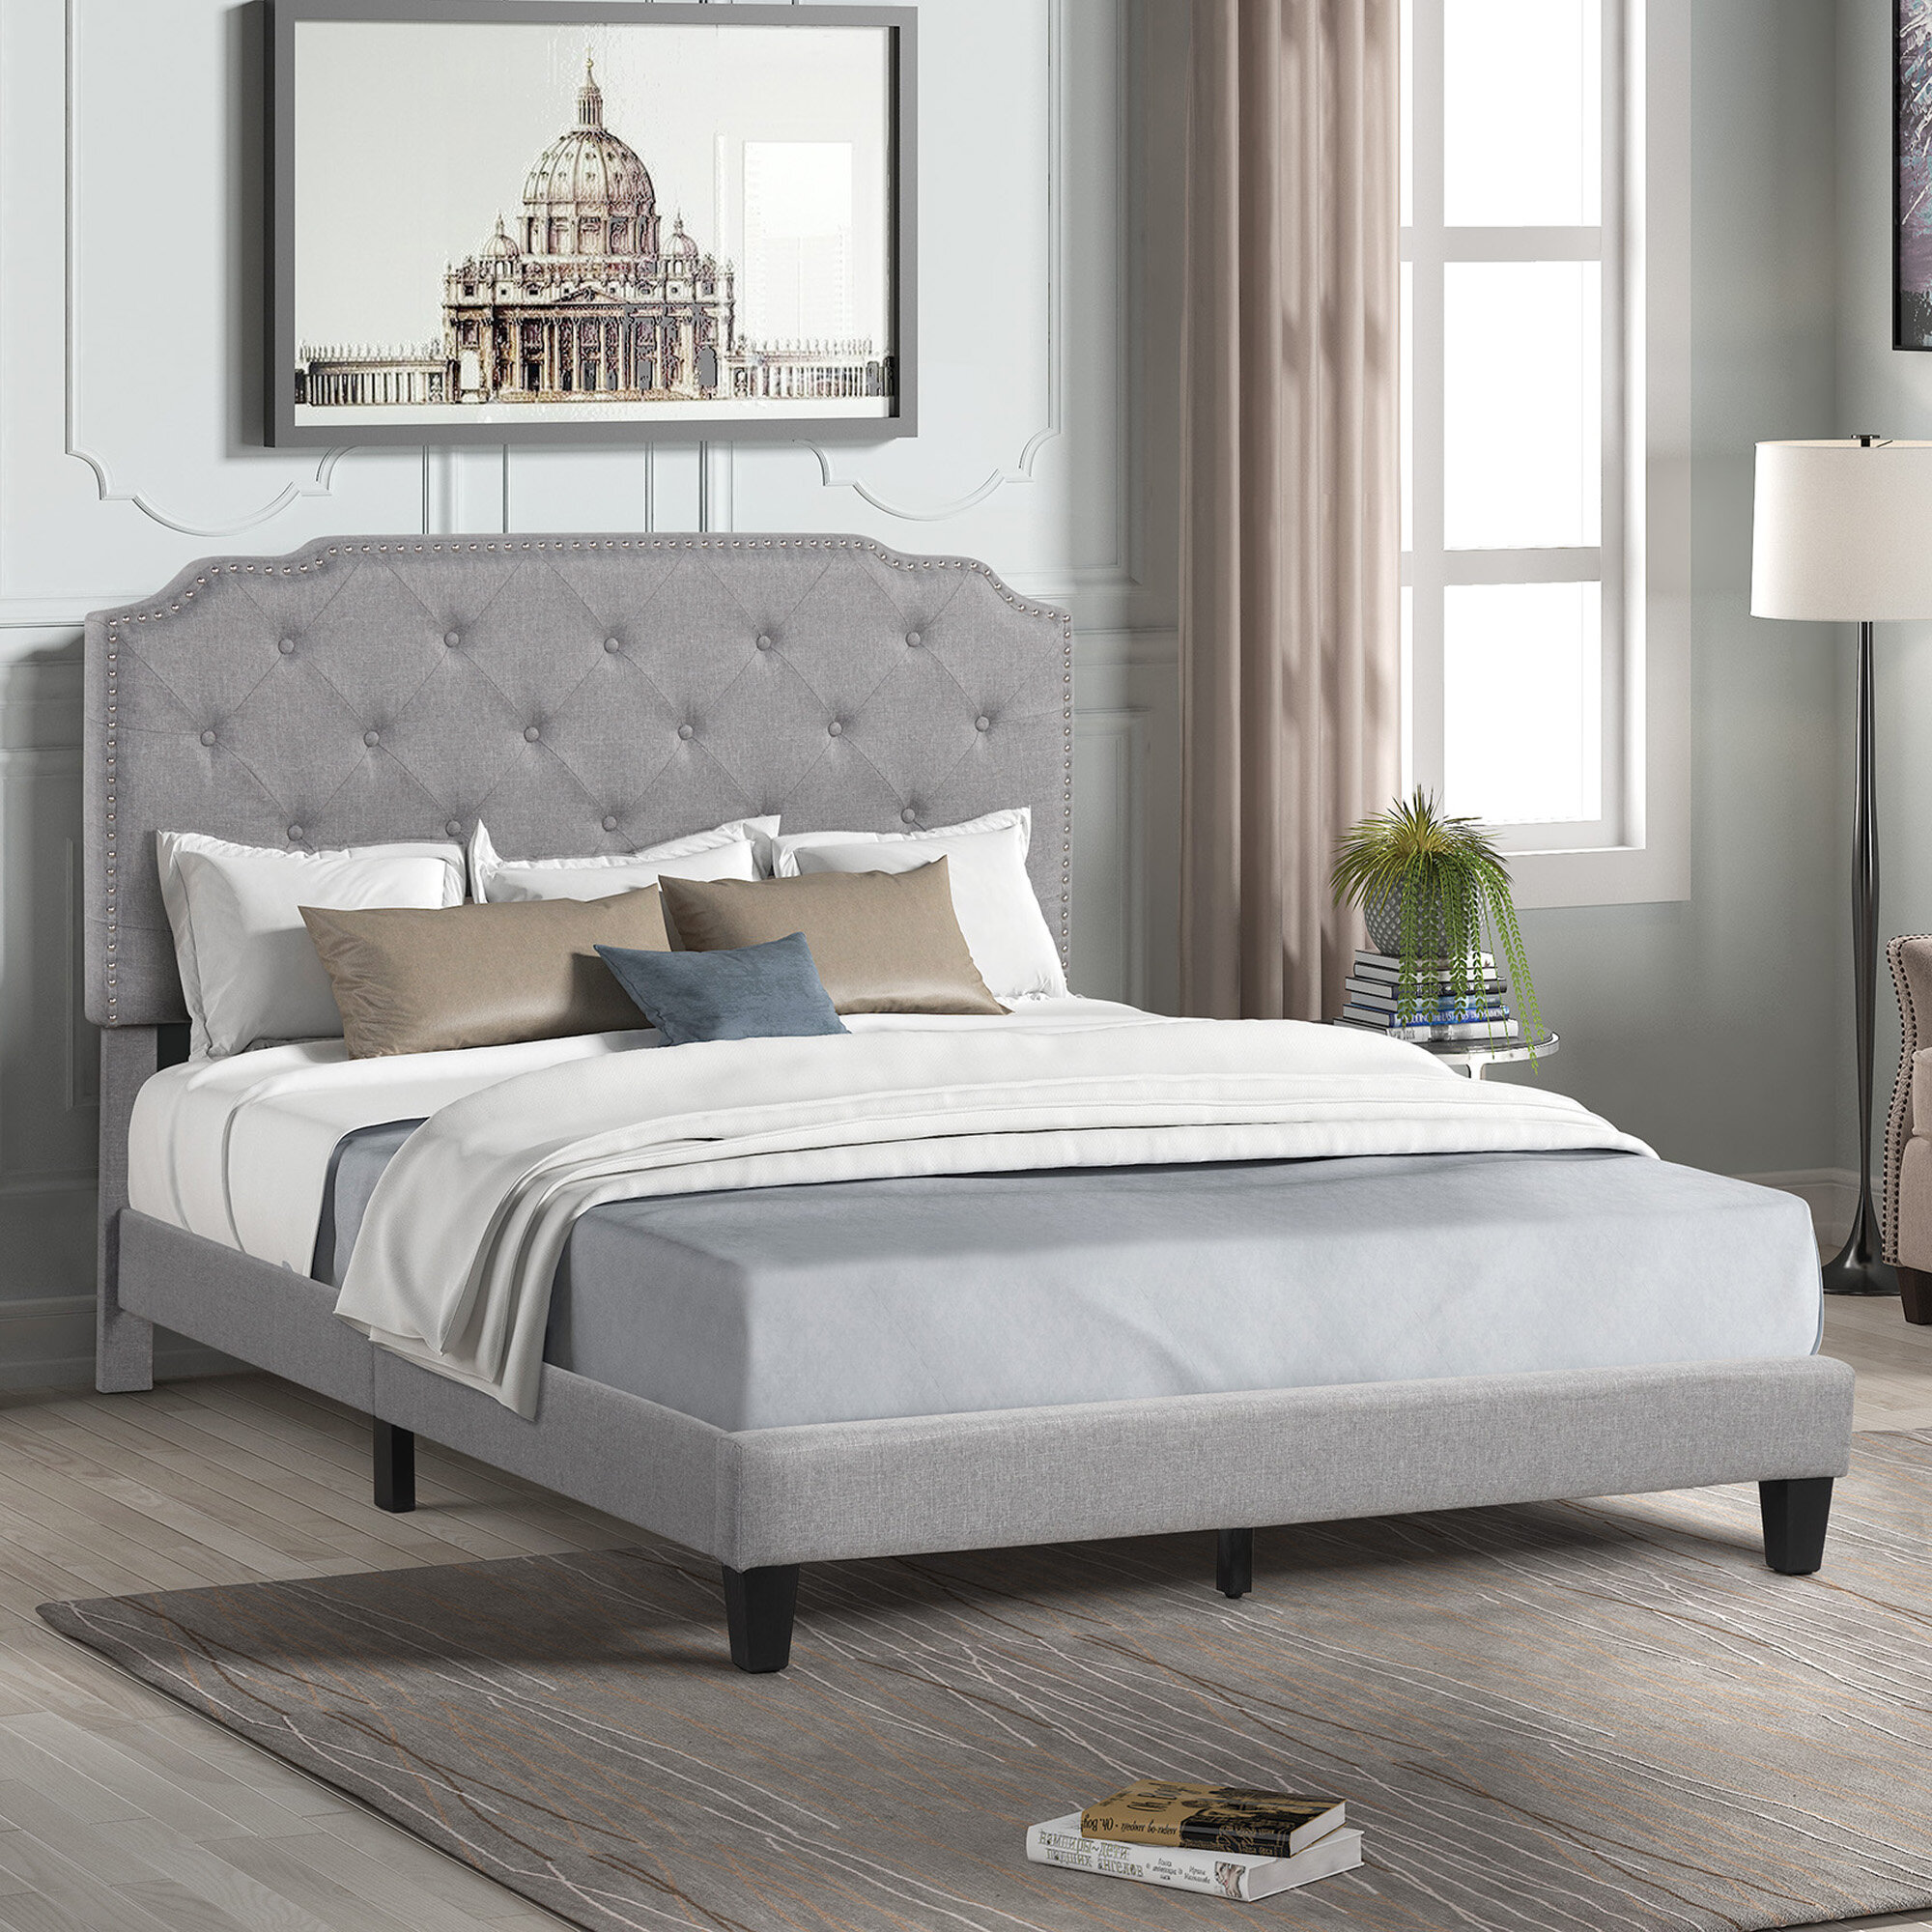 Durable Bed & Mattress Set Double - No Mattress Home Treats Grey Double Bed Frame with Padded Headboard & Mattress Double Bed Grey Fabric Bed Frame Upholstered Double Bed